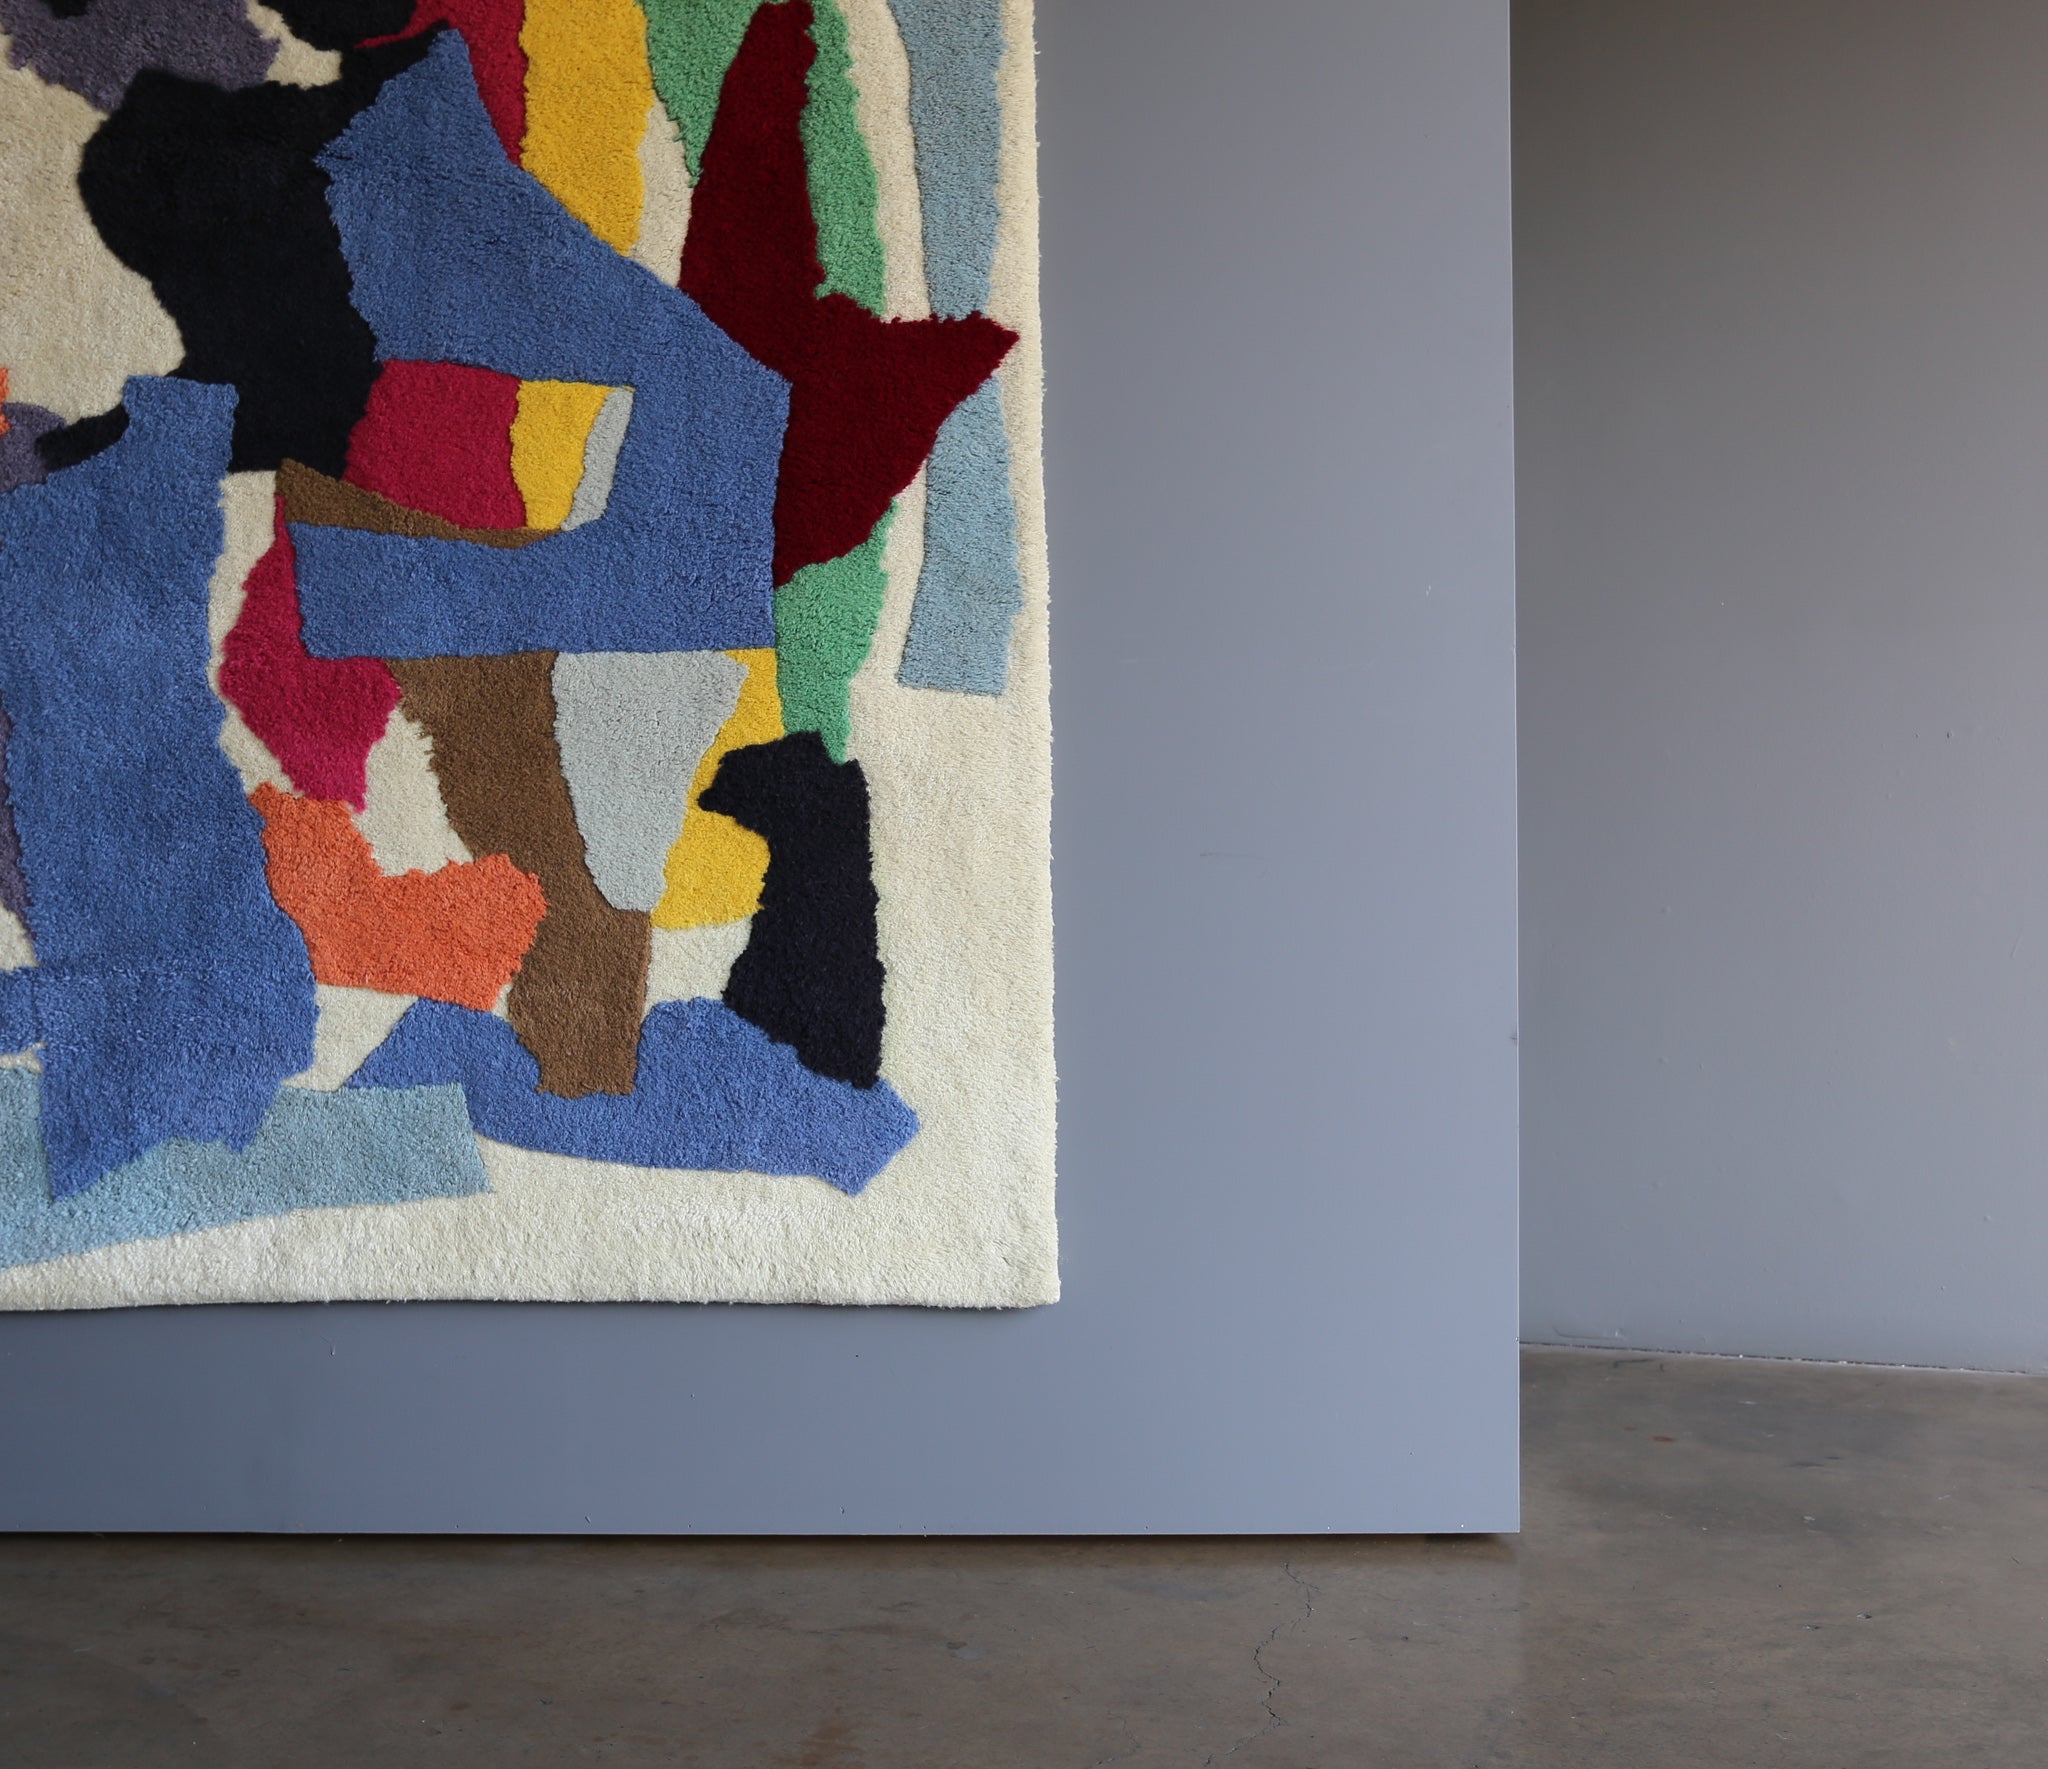 = SOLD = Robert Goodnough "Collage Tapestry" for Modern Master Tapestries, 1978